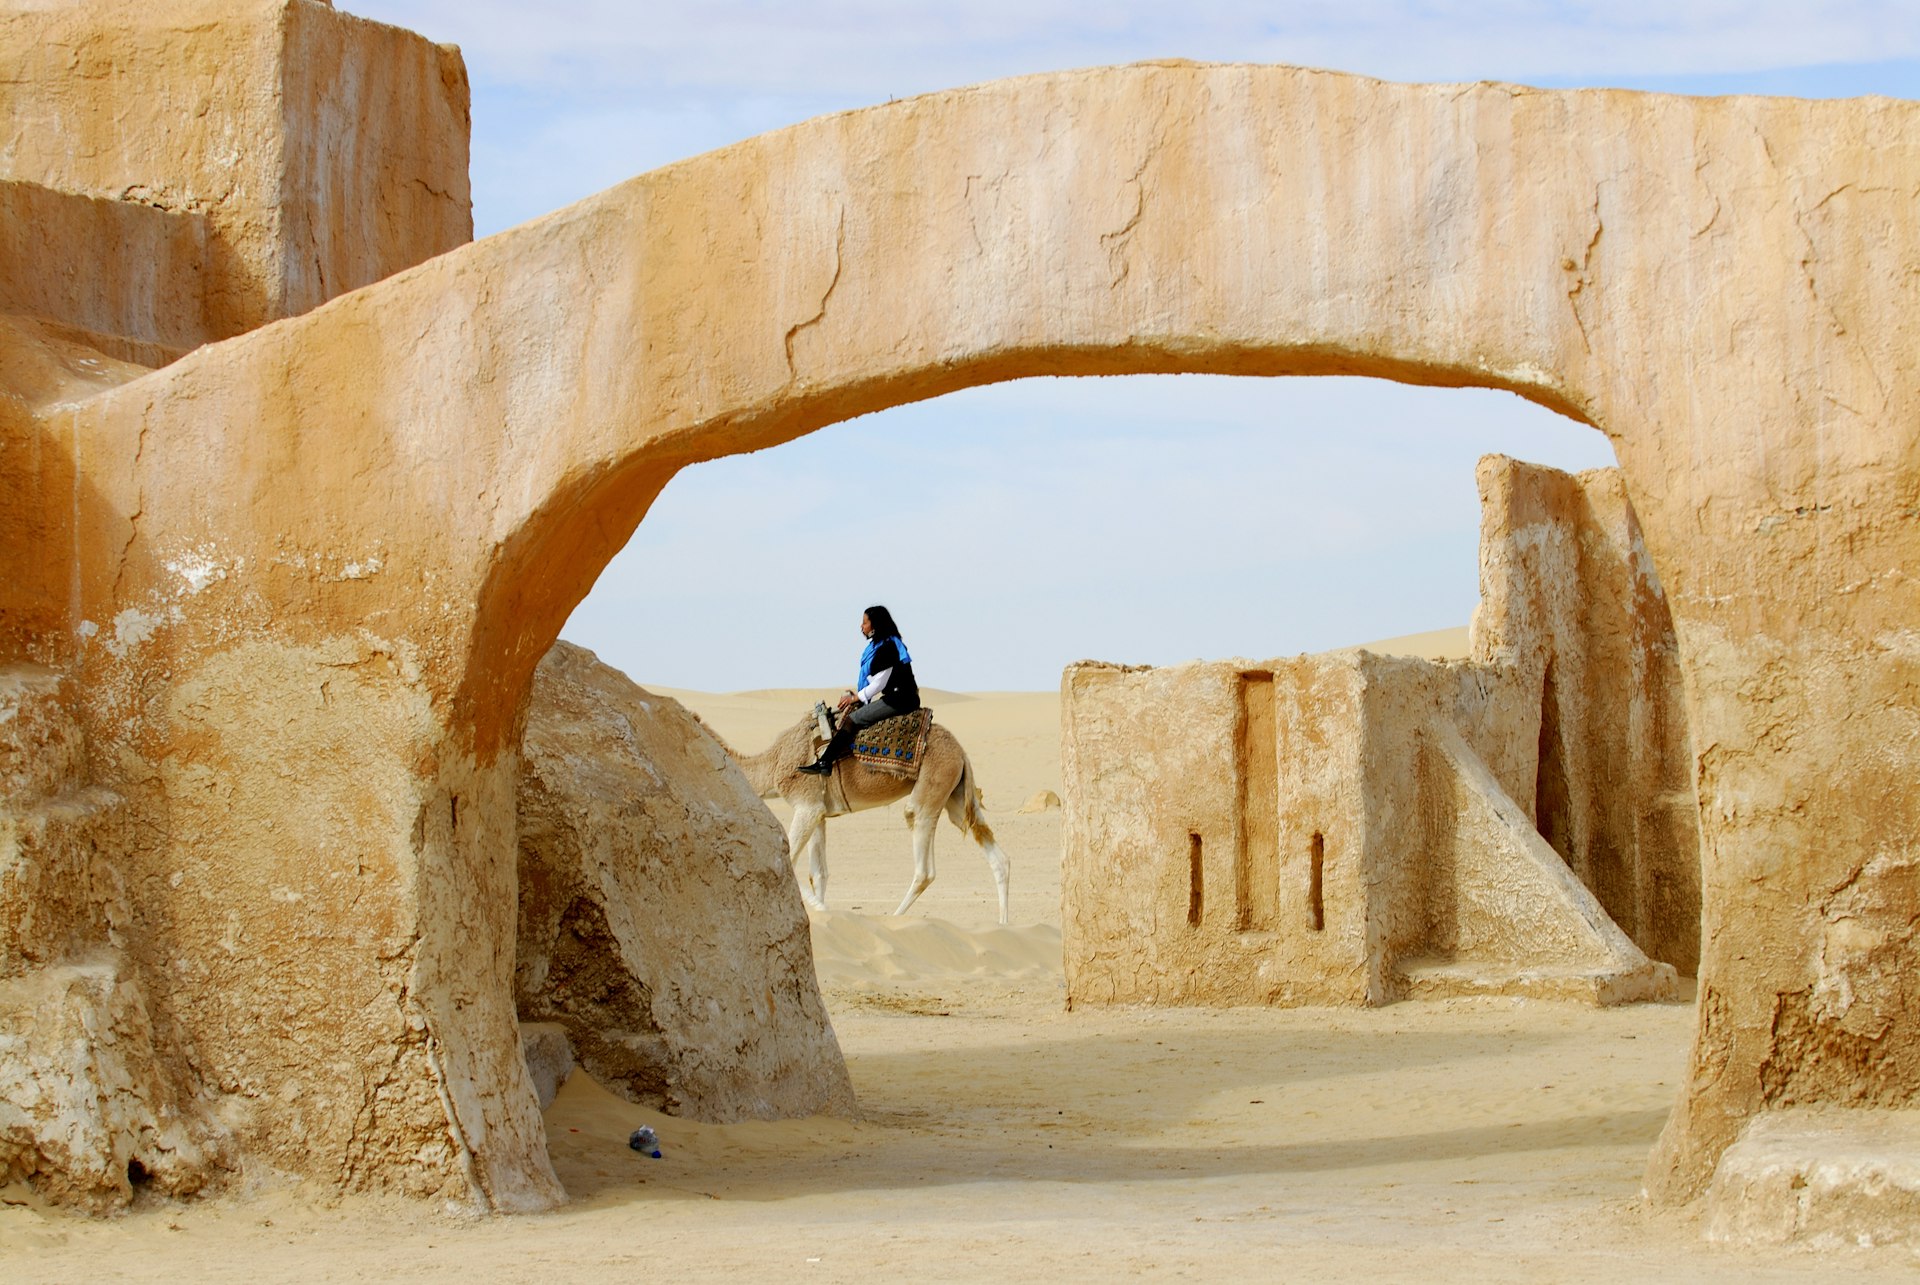 A camel ride near the set of Star Wars movies in Ong Jemel, Tunisia